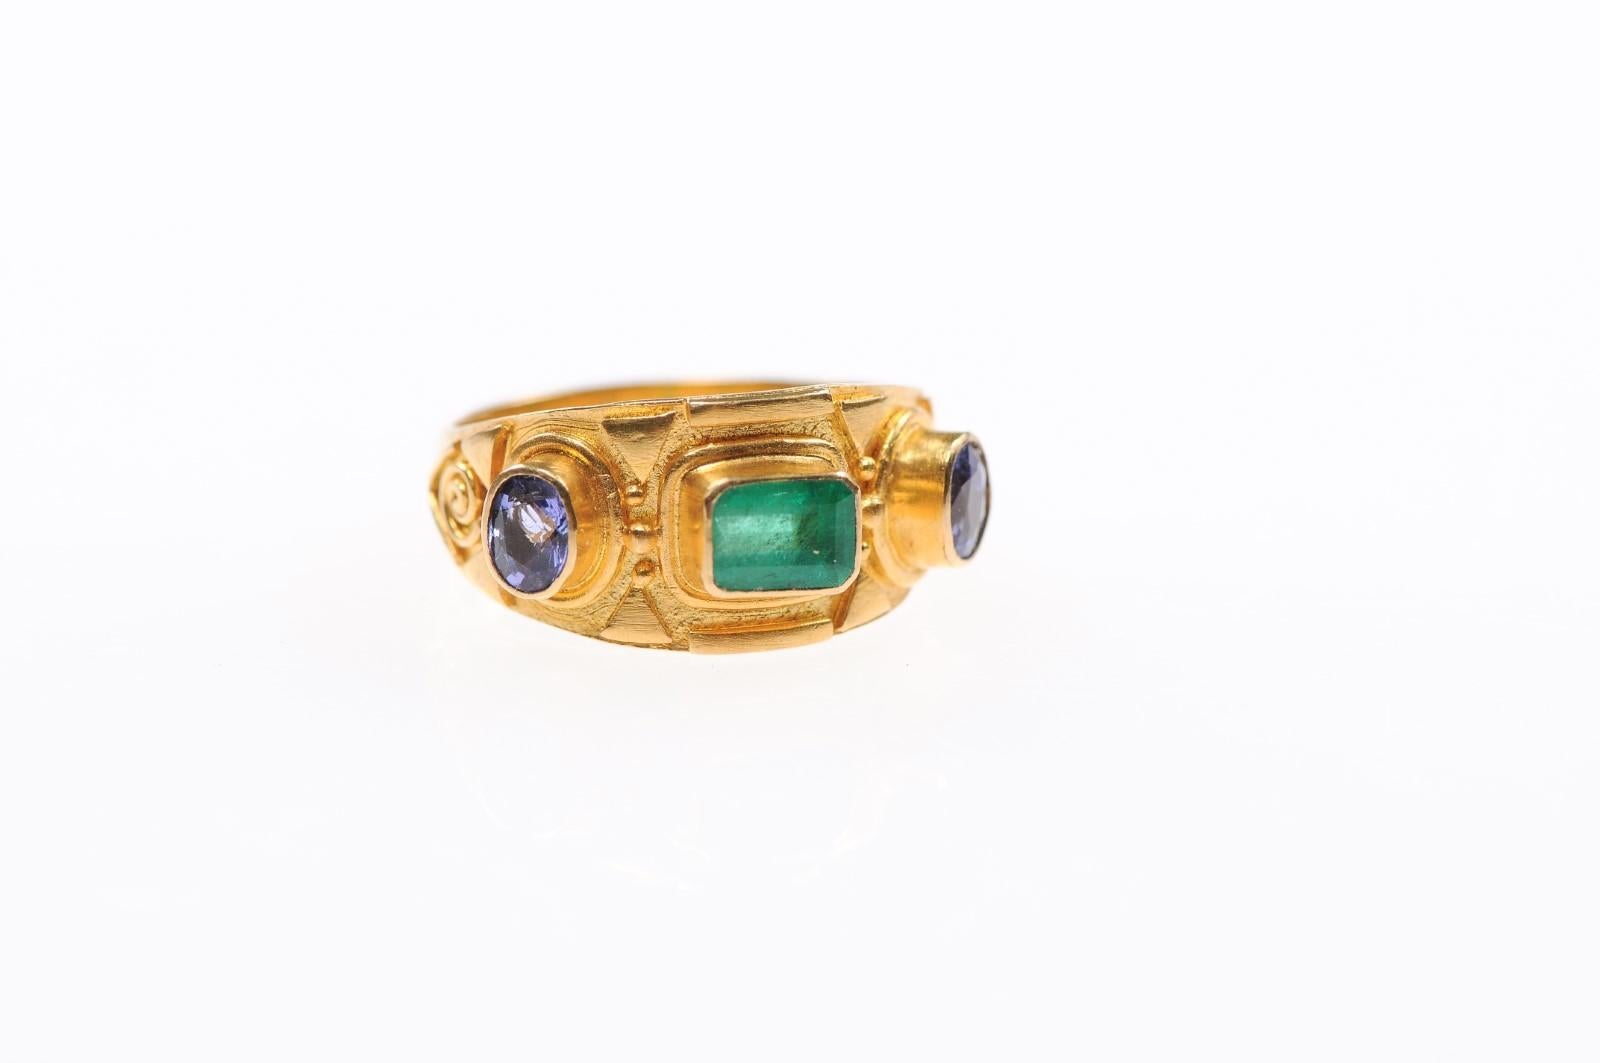 An artisan created gold and gemstone ring, with a beautiful Etruscan style inspired design. Ring features a center emerald, which is flanked by sapphires at either side, set within a 22 karat gold band. Ring size is approximately a ladies 7.5.